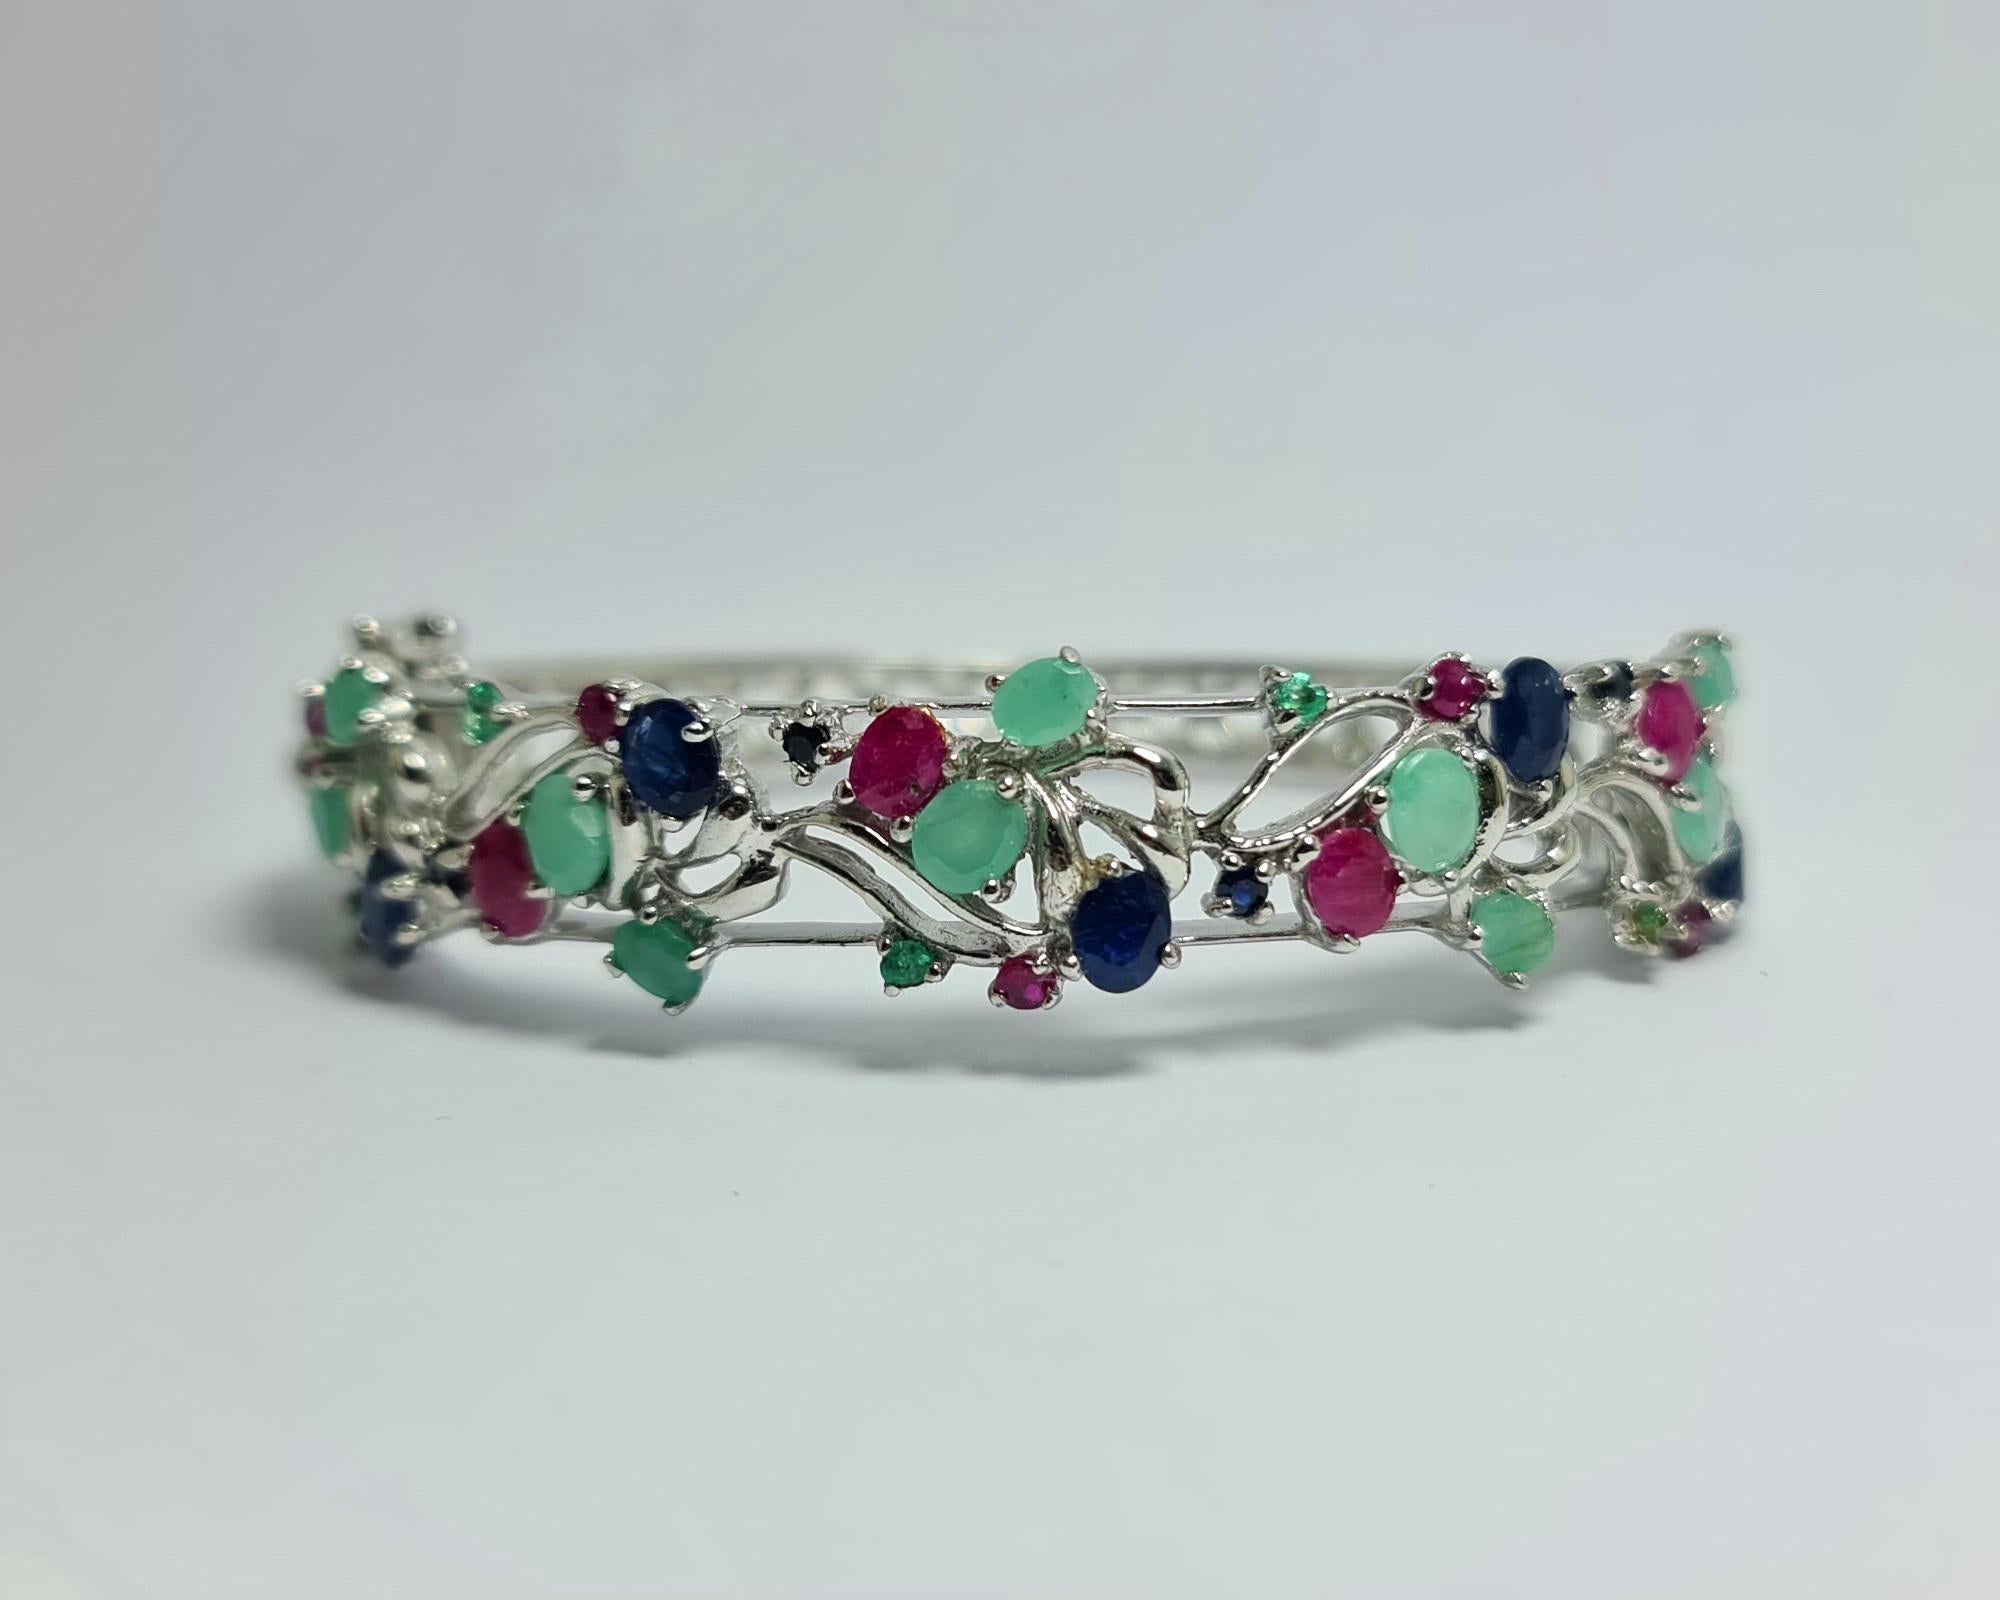 Natural Untreated Afghan Emeralds  and Thailand Rubies and Sapphires  Tutti Frutti set in Pure Sterling Silver with Rhodium Plated Hinged Bracelet Cuff Bangle 

Total carats weight: 14 carats
Total weight of the bracelet: 28 grams